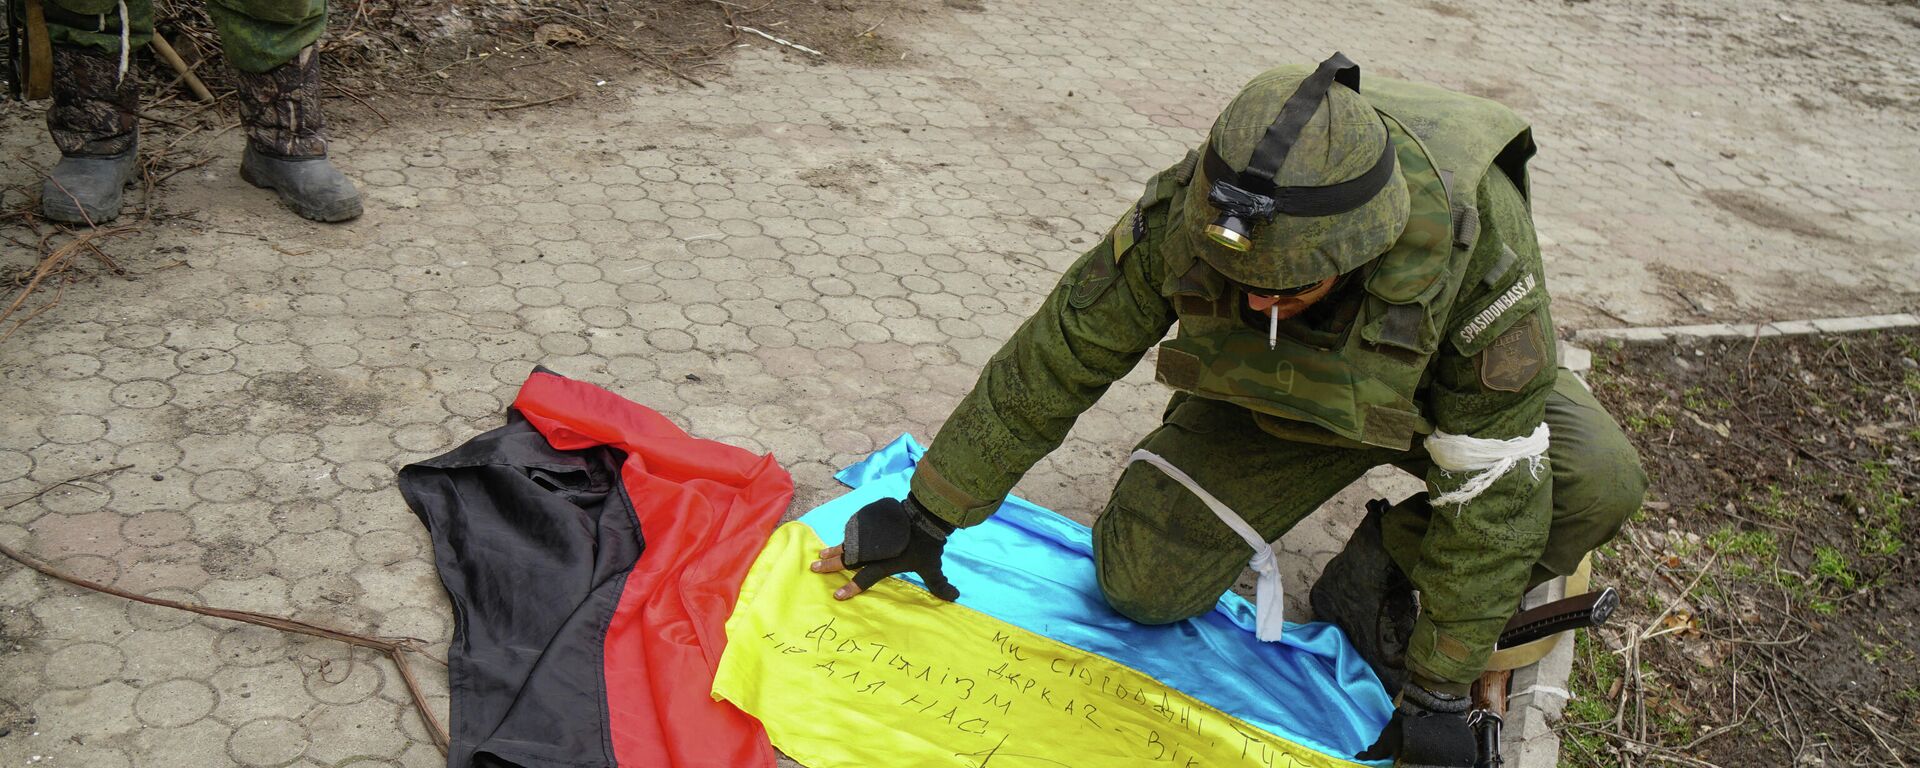 A serviceman of militia of Donetsk People's Republic (DPR) demonstrates flags of Ukraine and of Right Sector right-wing   radical group (banned in Russia) found in a camp of Ukrainian forces outside Mariupol, Ukraine - Sputnik International, 1920, 04.03.2022